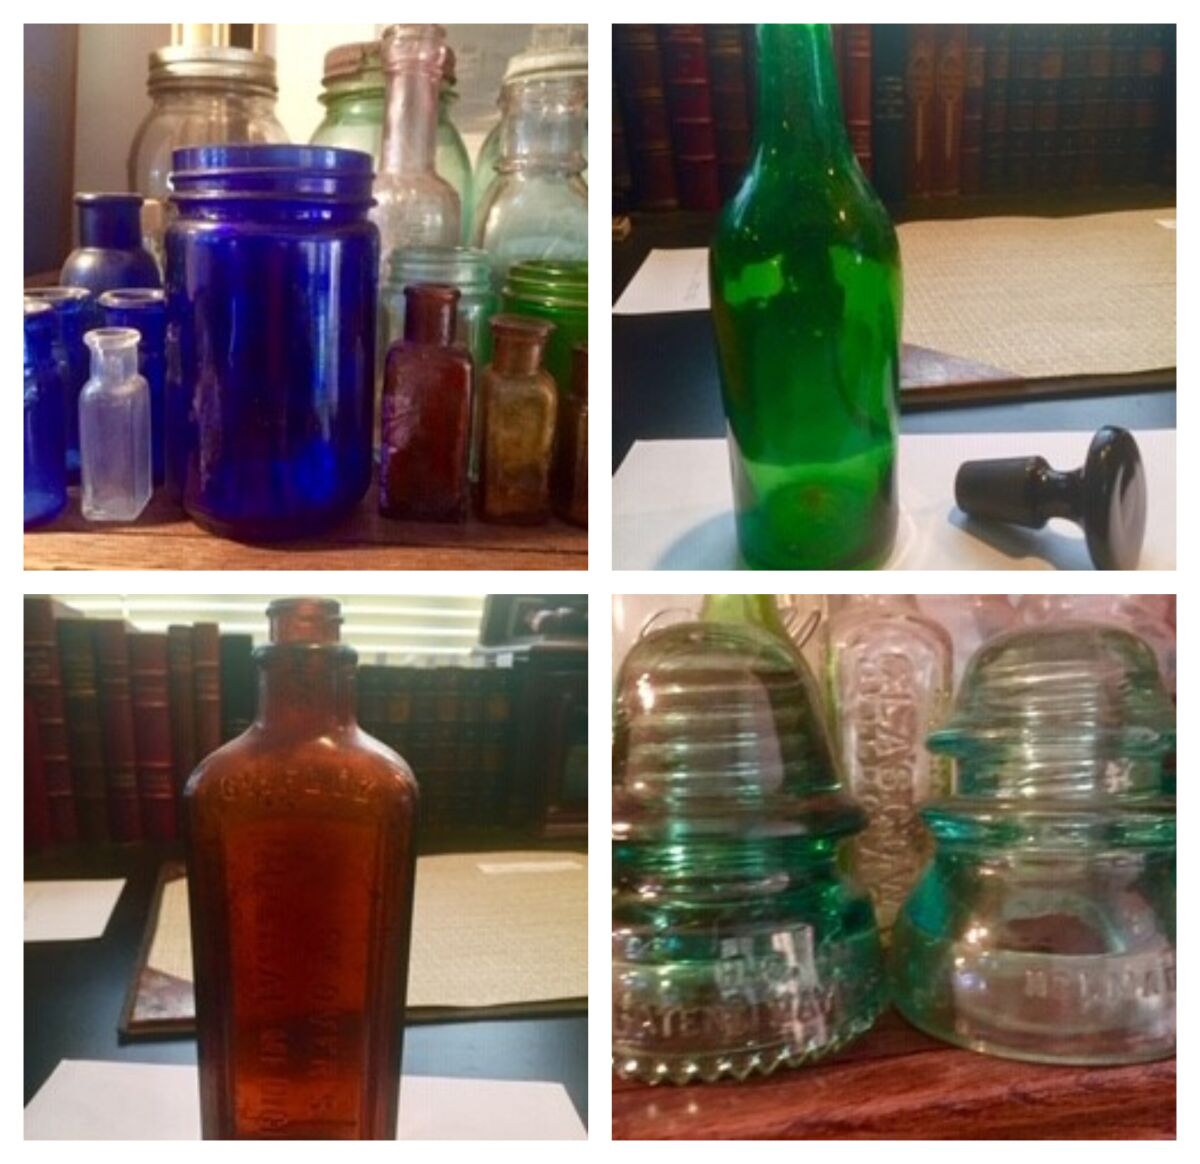 These are some of the old bottles that John Weil's dog, Baron, dug up in his Bird Rock backyard.